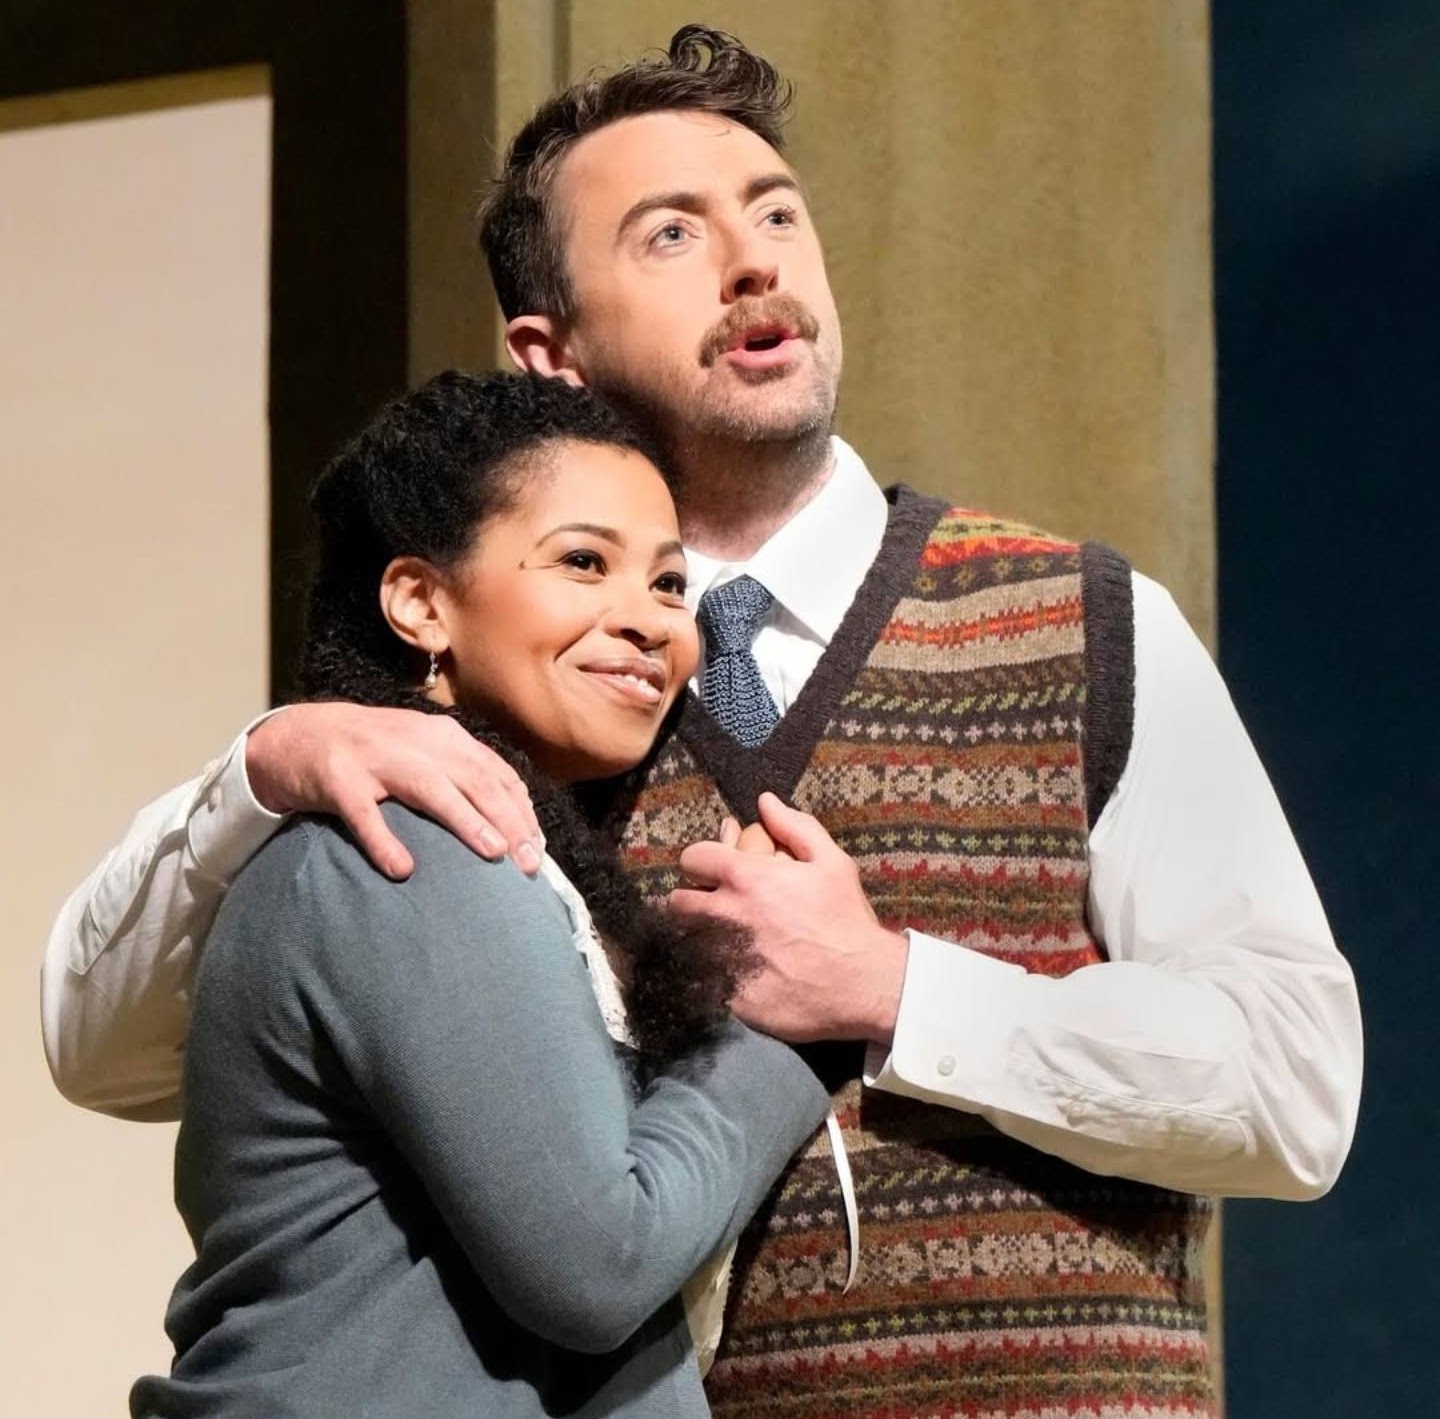 IN REVIEW: soprano GOLDA SCHULTZ as Anne Trulove (left) and tenor BEN BLISS as Tom Rakewell (right) in The Metropolitan Opera's 2022 revival of Igor Stravinsky's THE RAKE'S PROGRESS [Photograph by Ken Howard, © by The Metropolitan Opera]